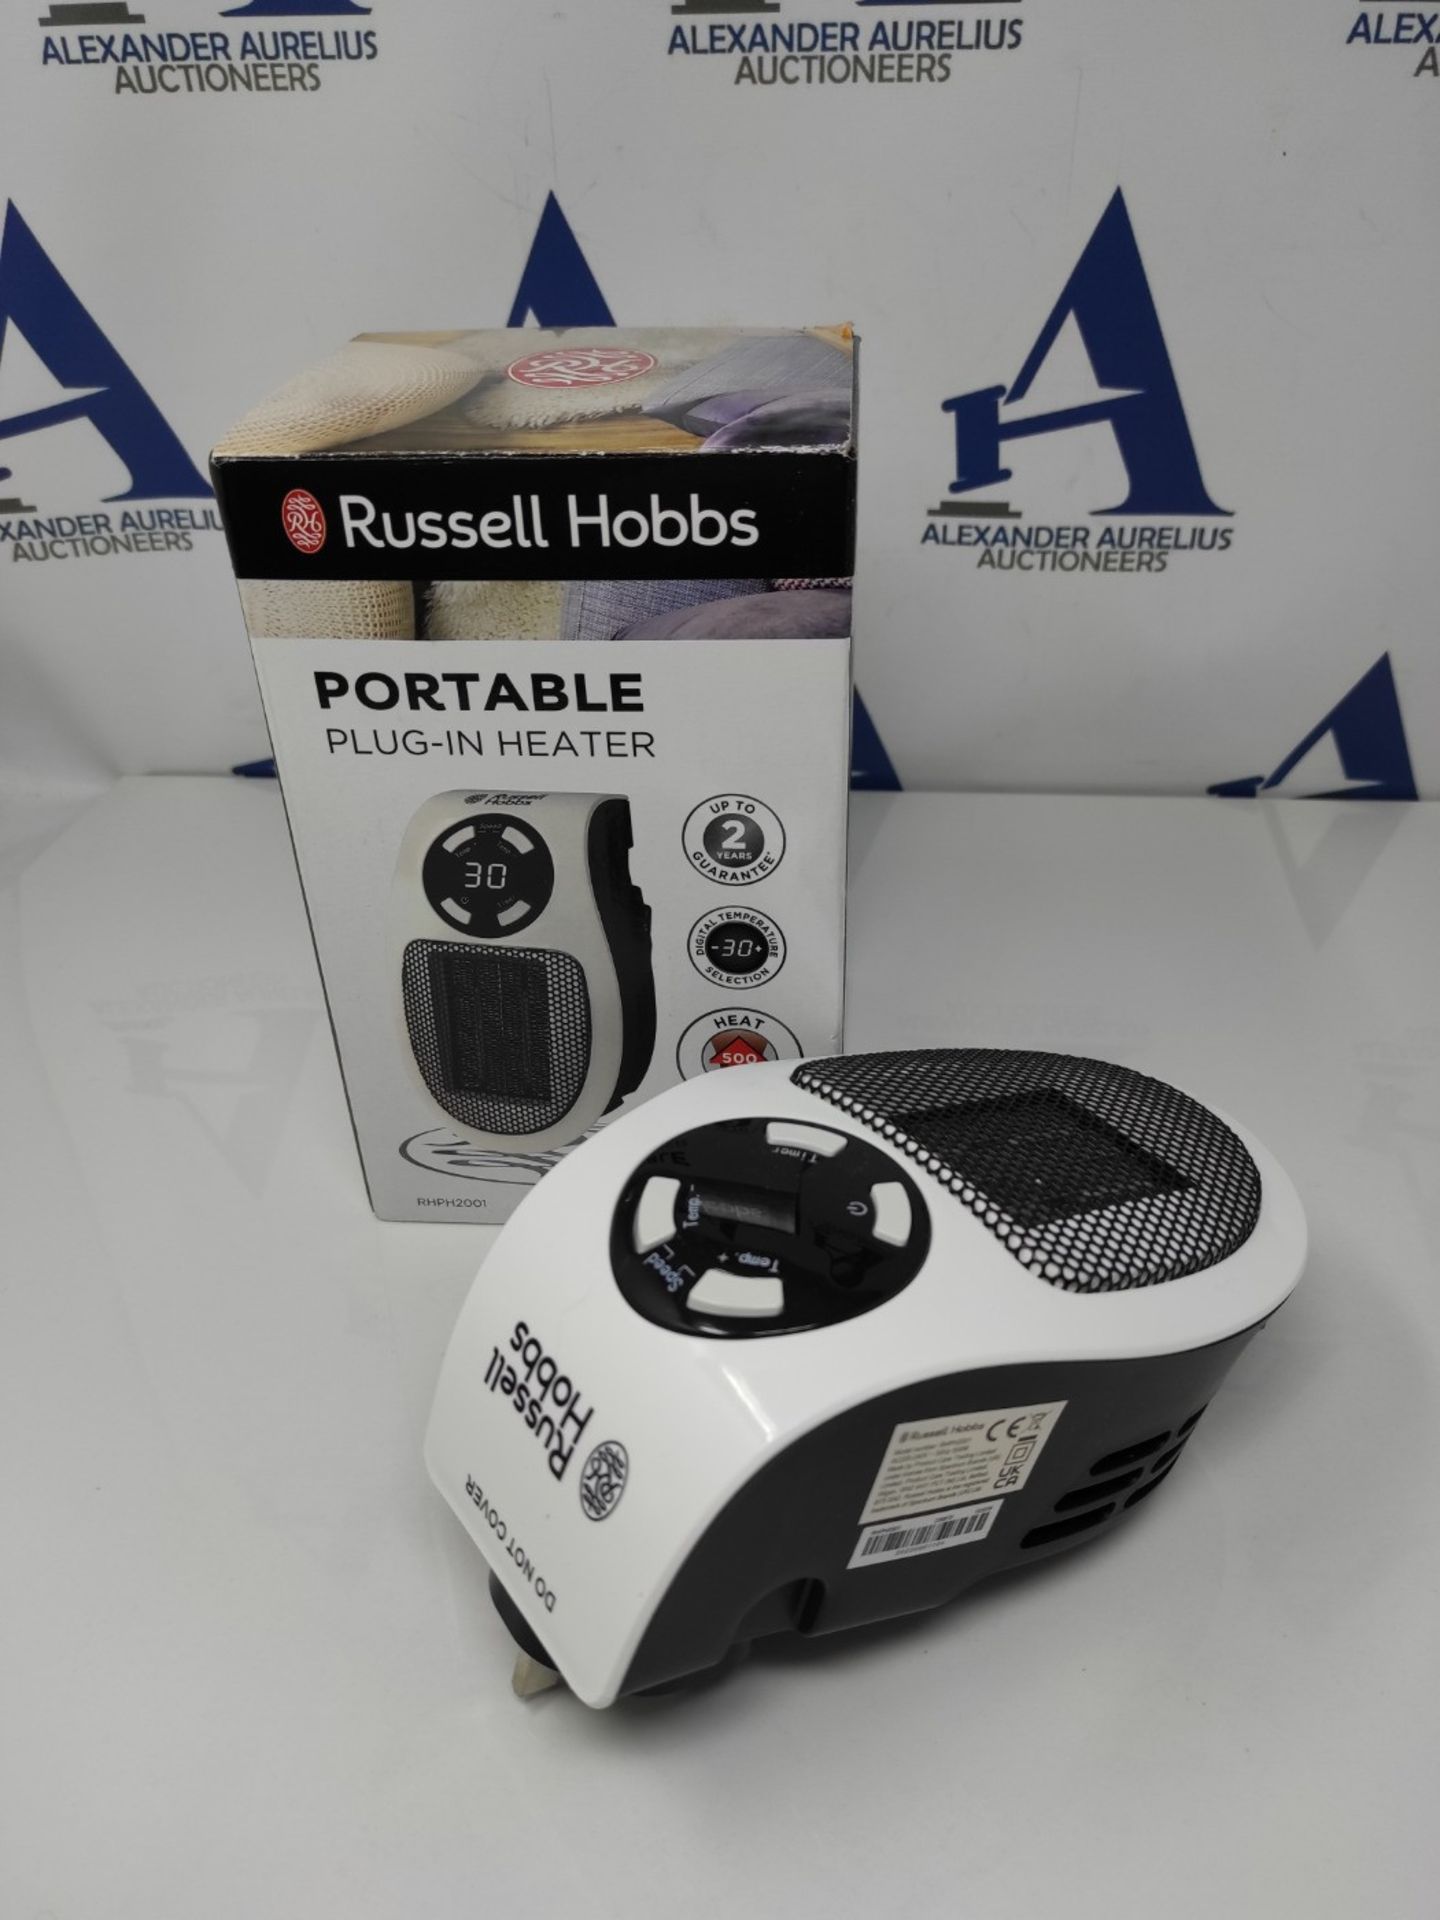 Russell Hobbs RHPH2001 500W Ceramic Plug Heater, Adjustable thermostat, 12 Hour Timer - Image 2 of 3